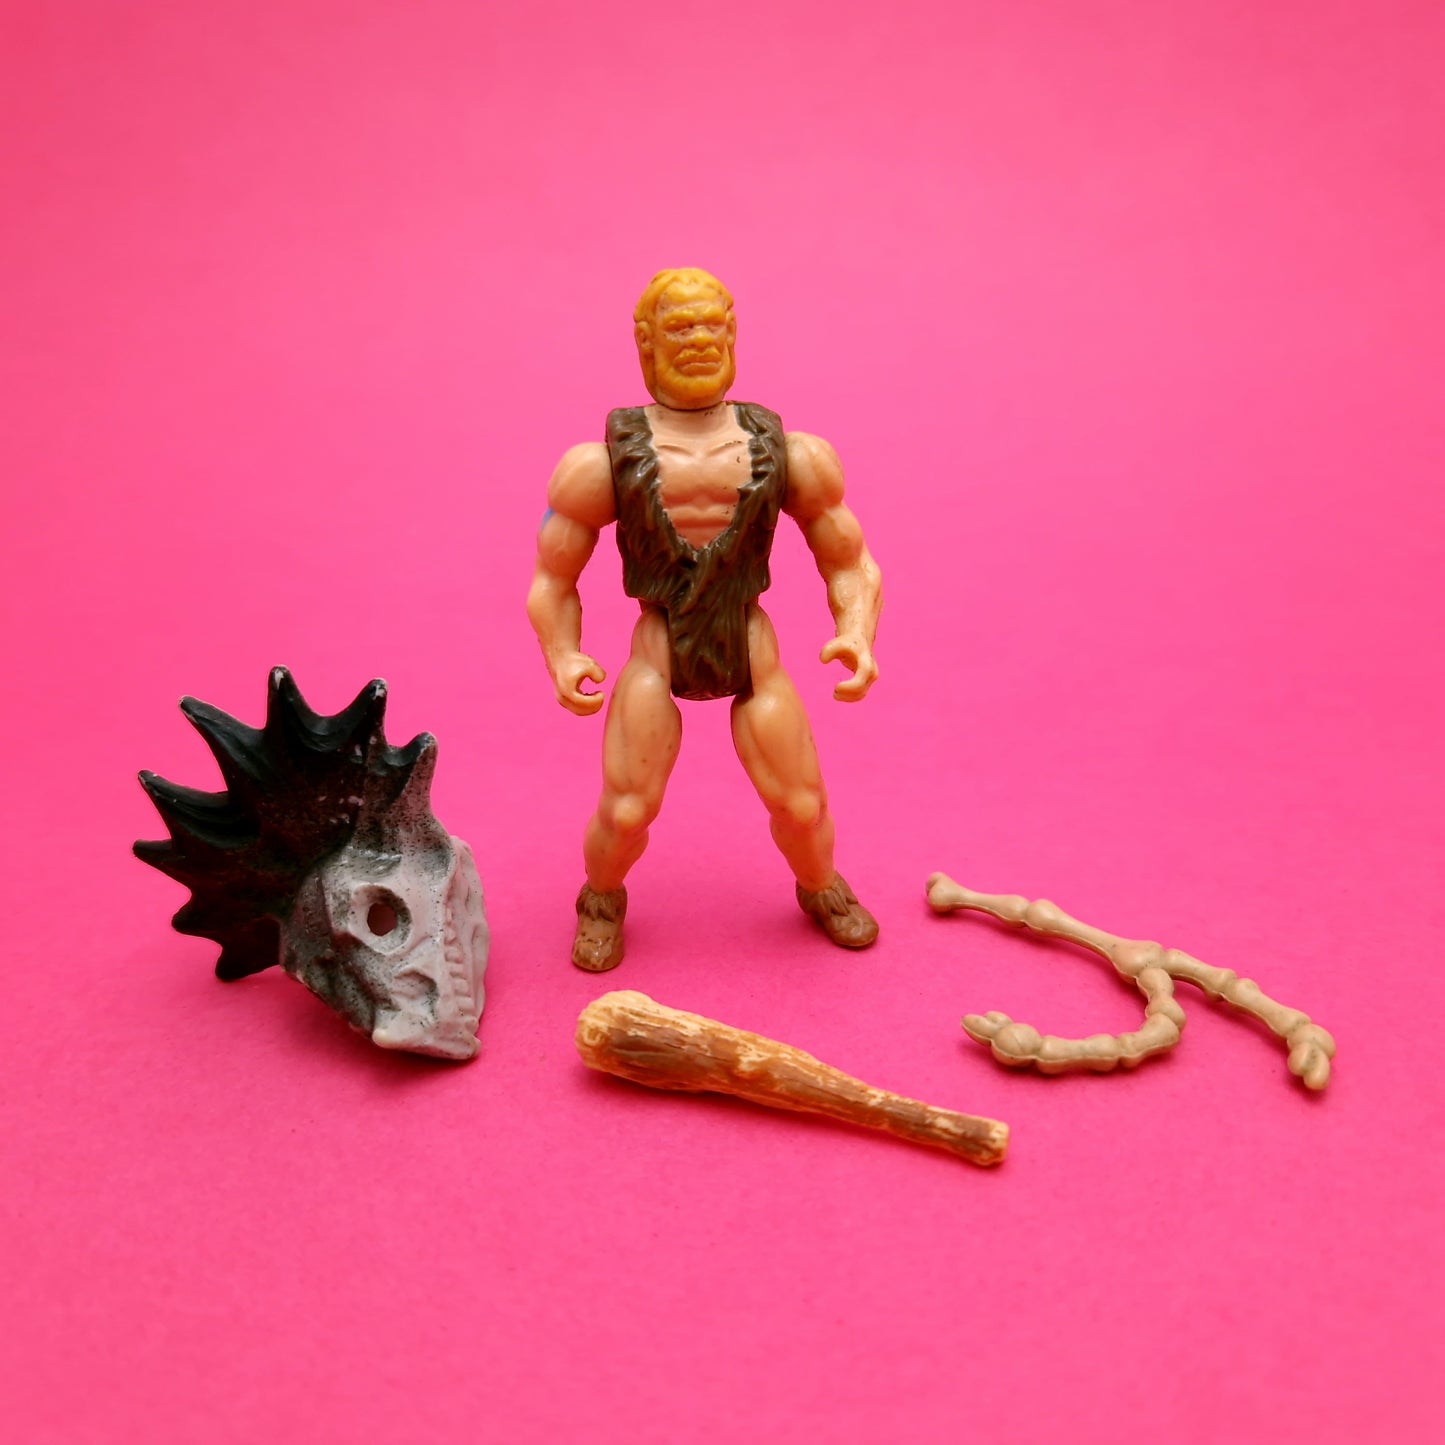 BONE AGE ☆ TUND THE THUNDER Vintage Action Figure ☆ Near Complete Kenner